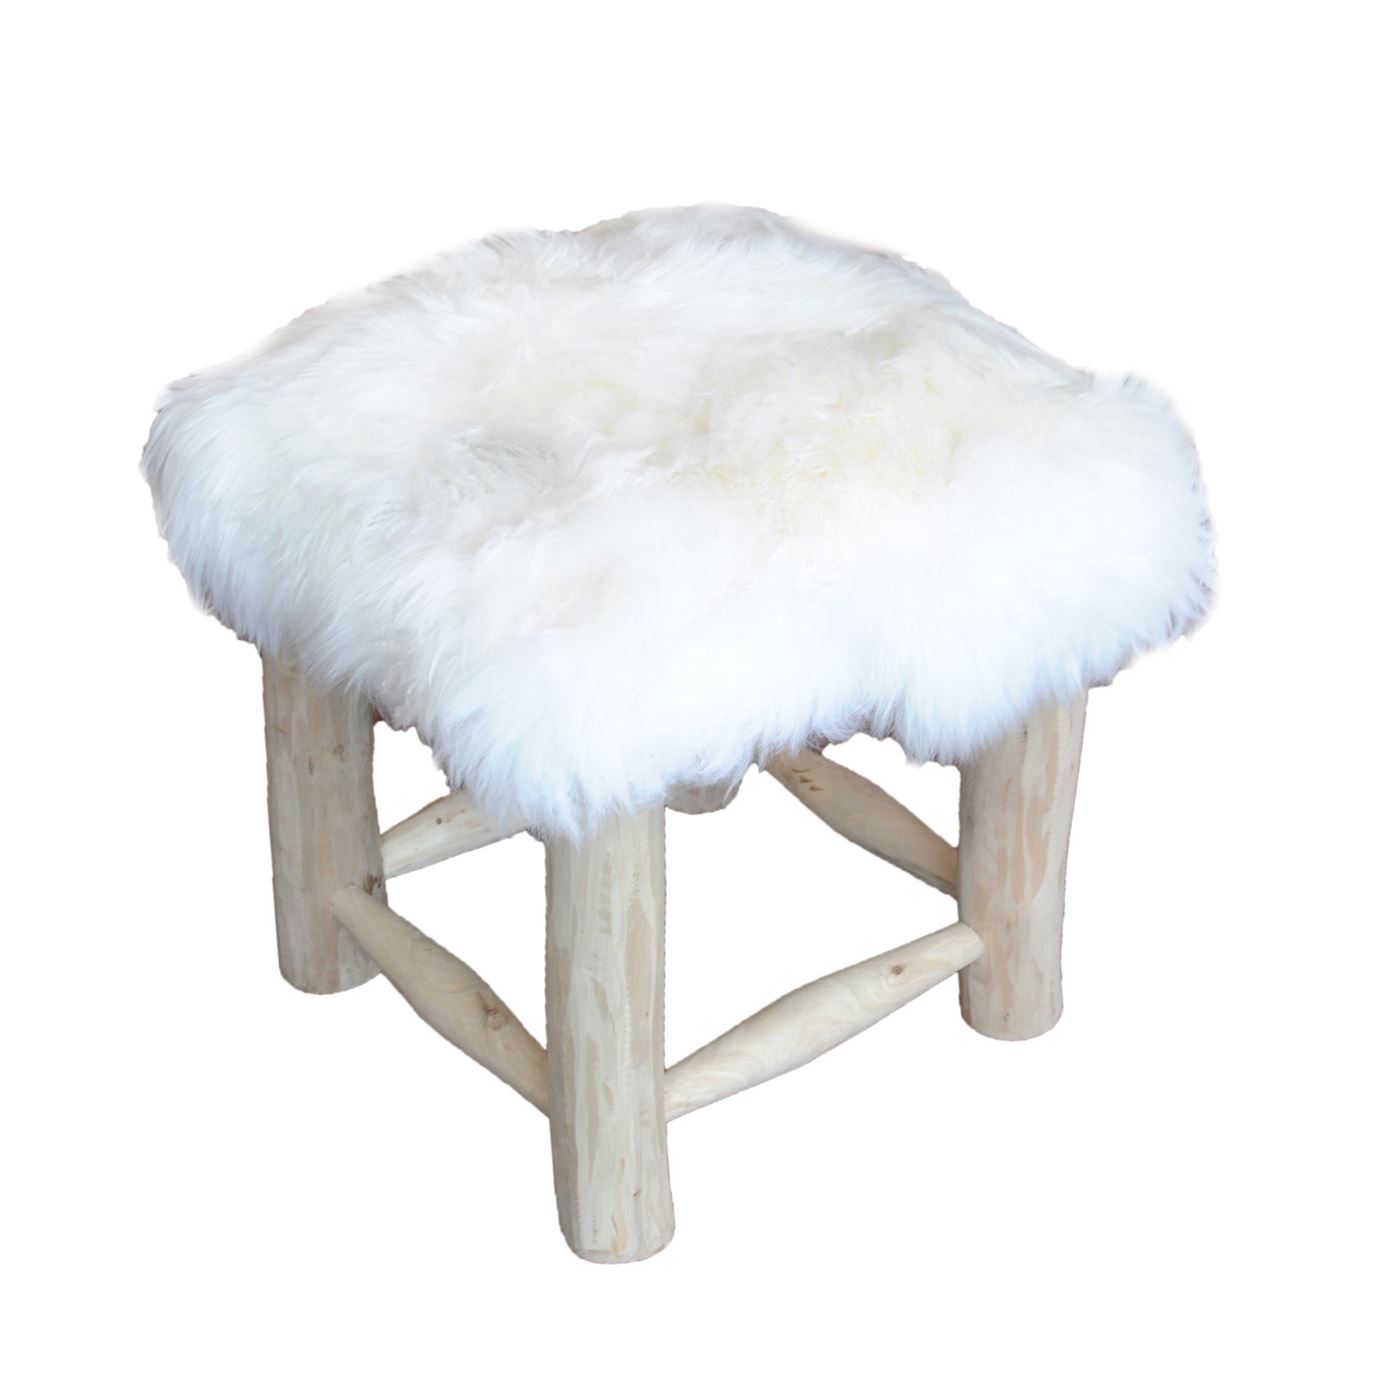 Nordic Square Stool, Sheep Hide, Natural White, Hm Stitching, Flat Weave 